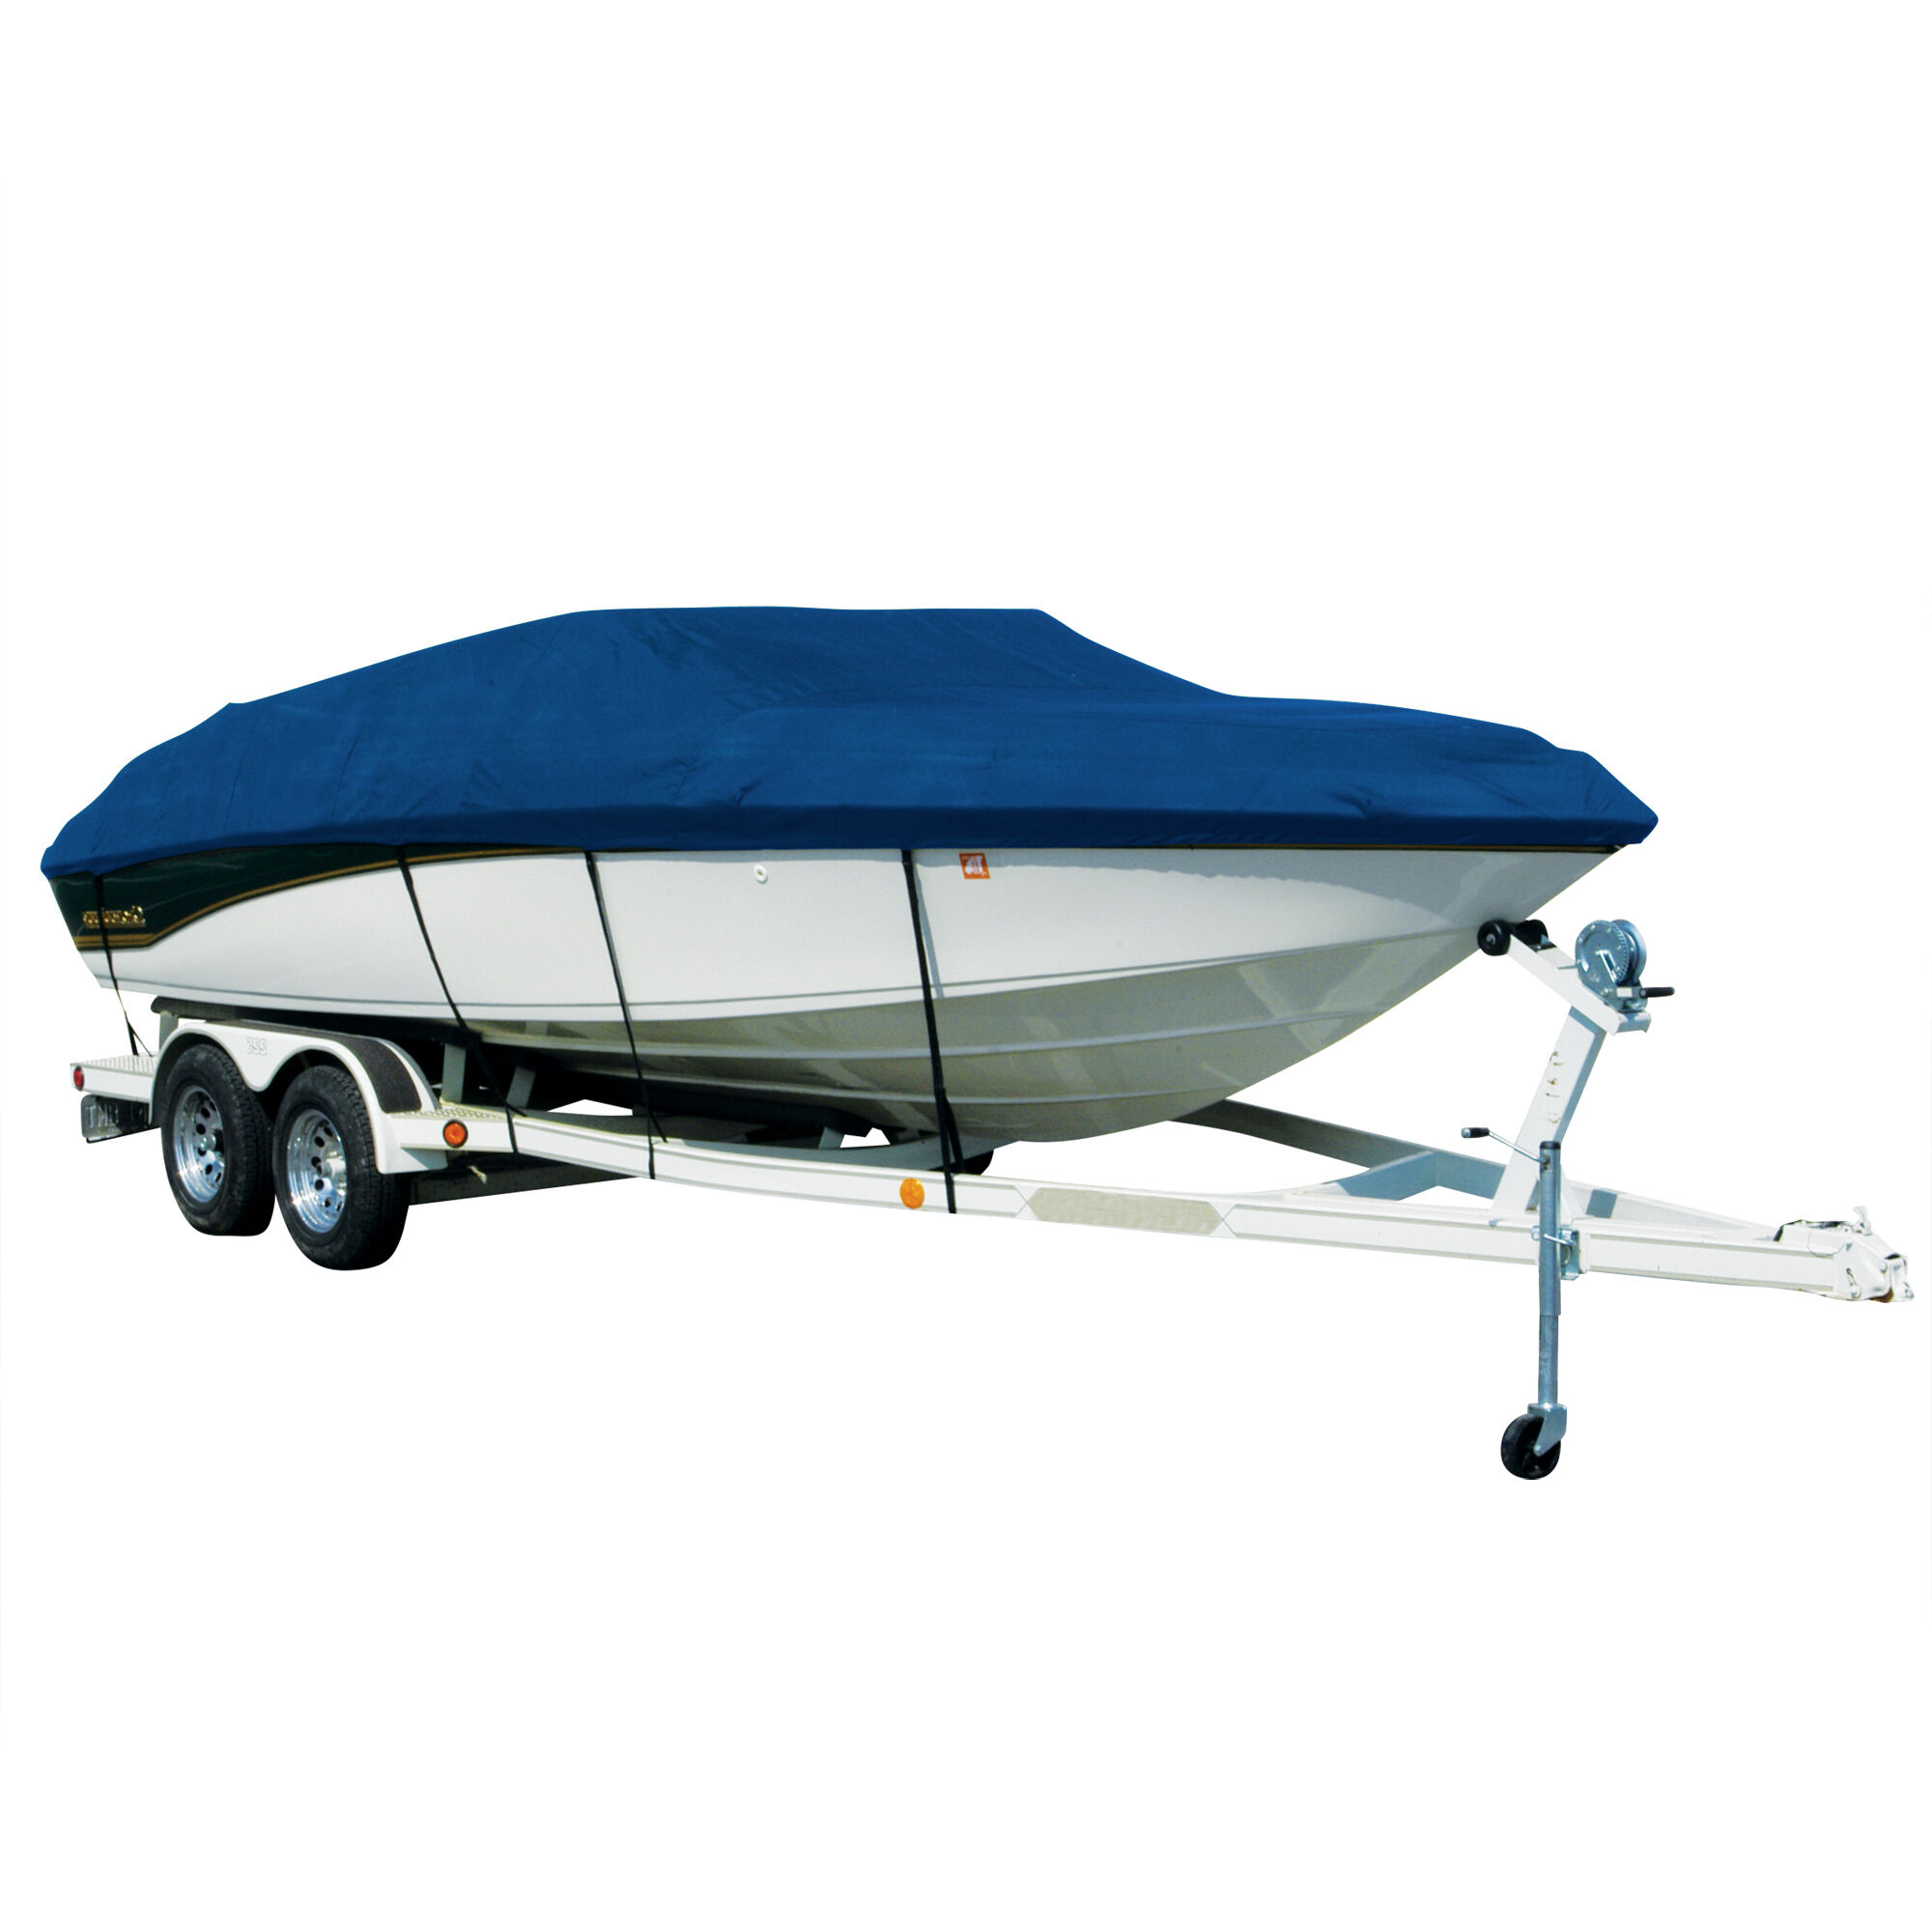 Covermate Hurricane Sharkskin Exact-Fit Nitro Boat Cover Fits 1999-2005 Nitro NX 882 SC Outboard w/ Port Trolling Motor in Royal Grey Heather